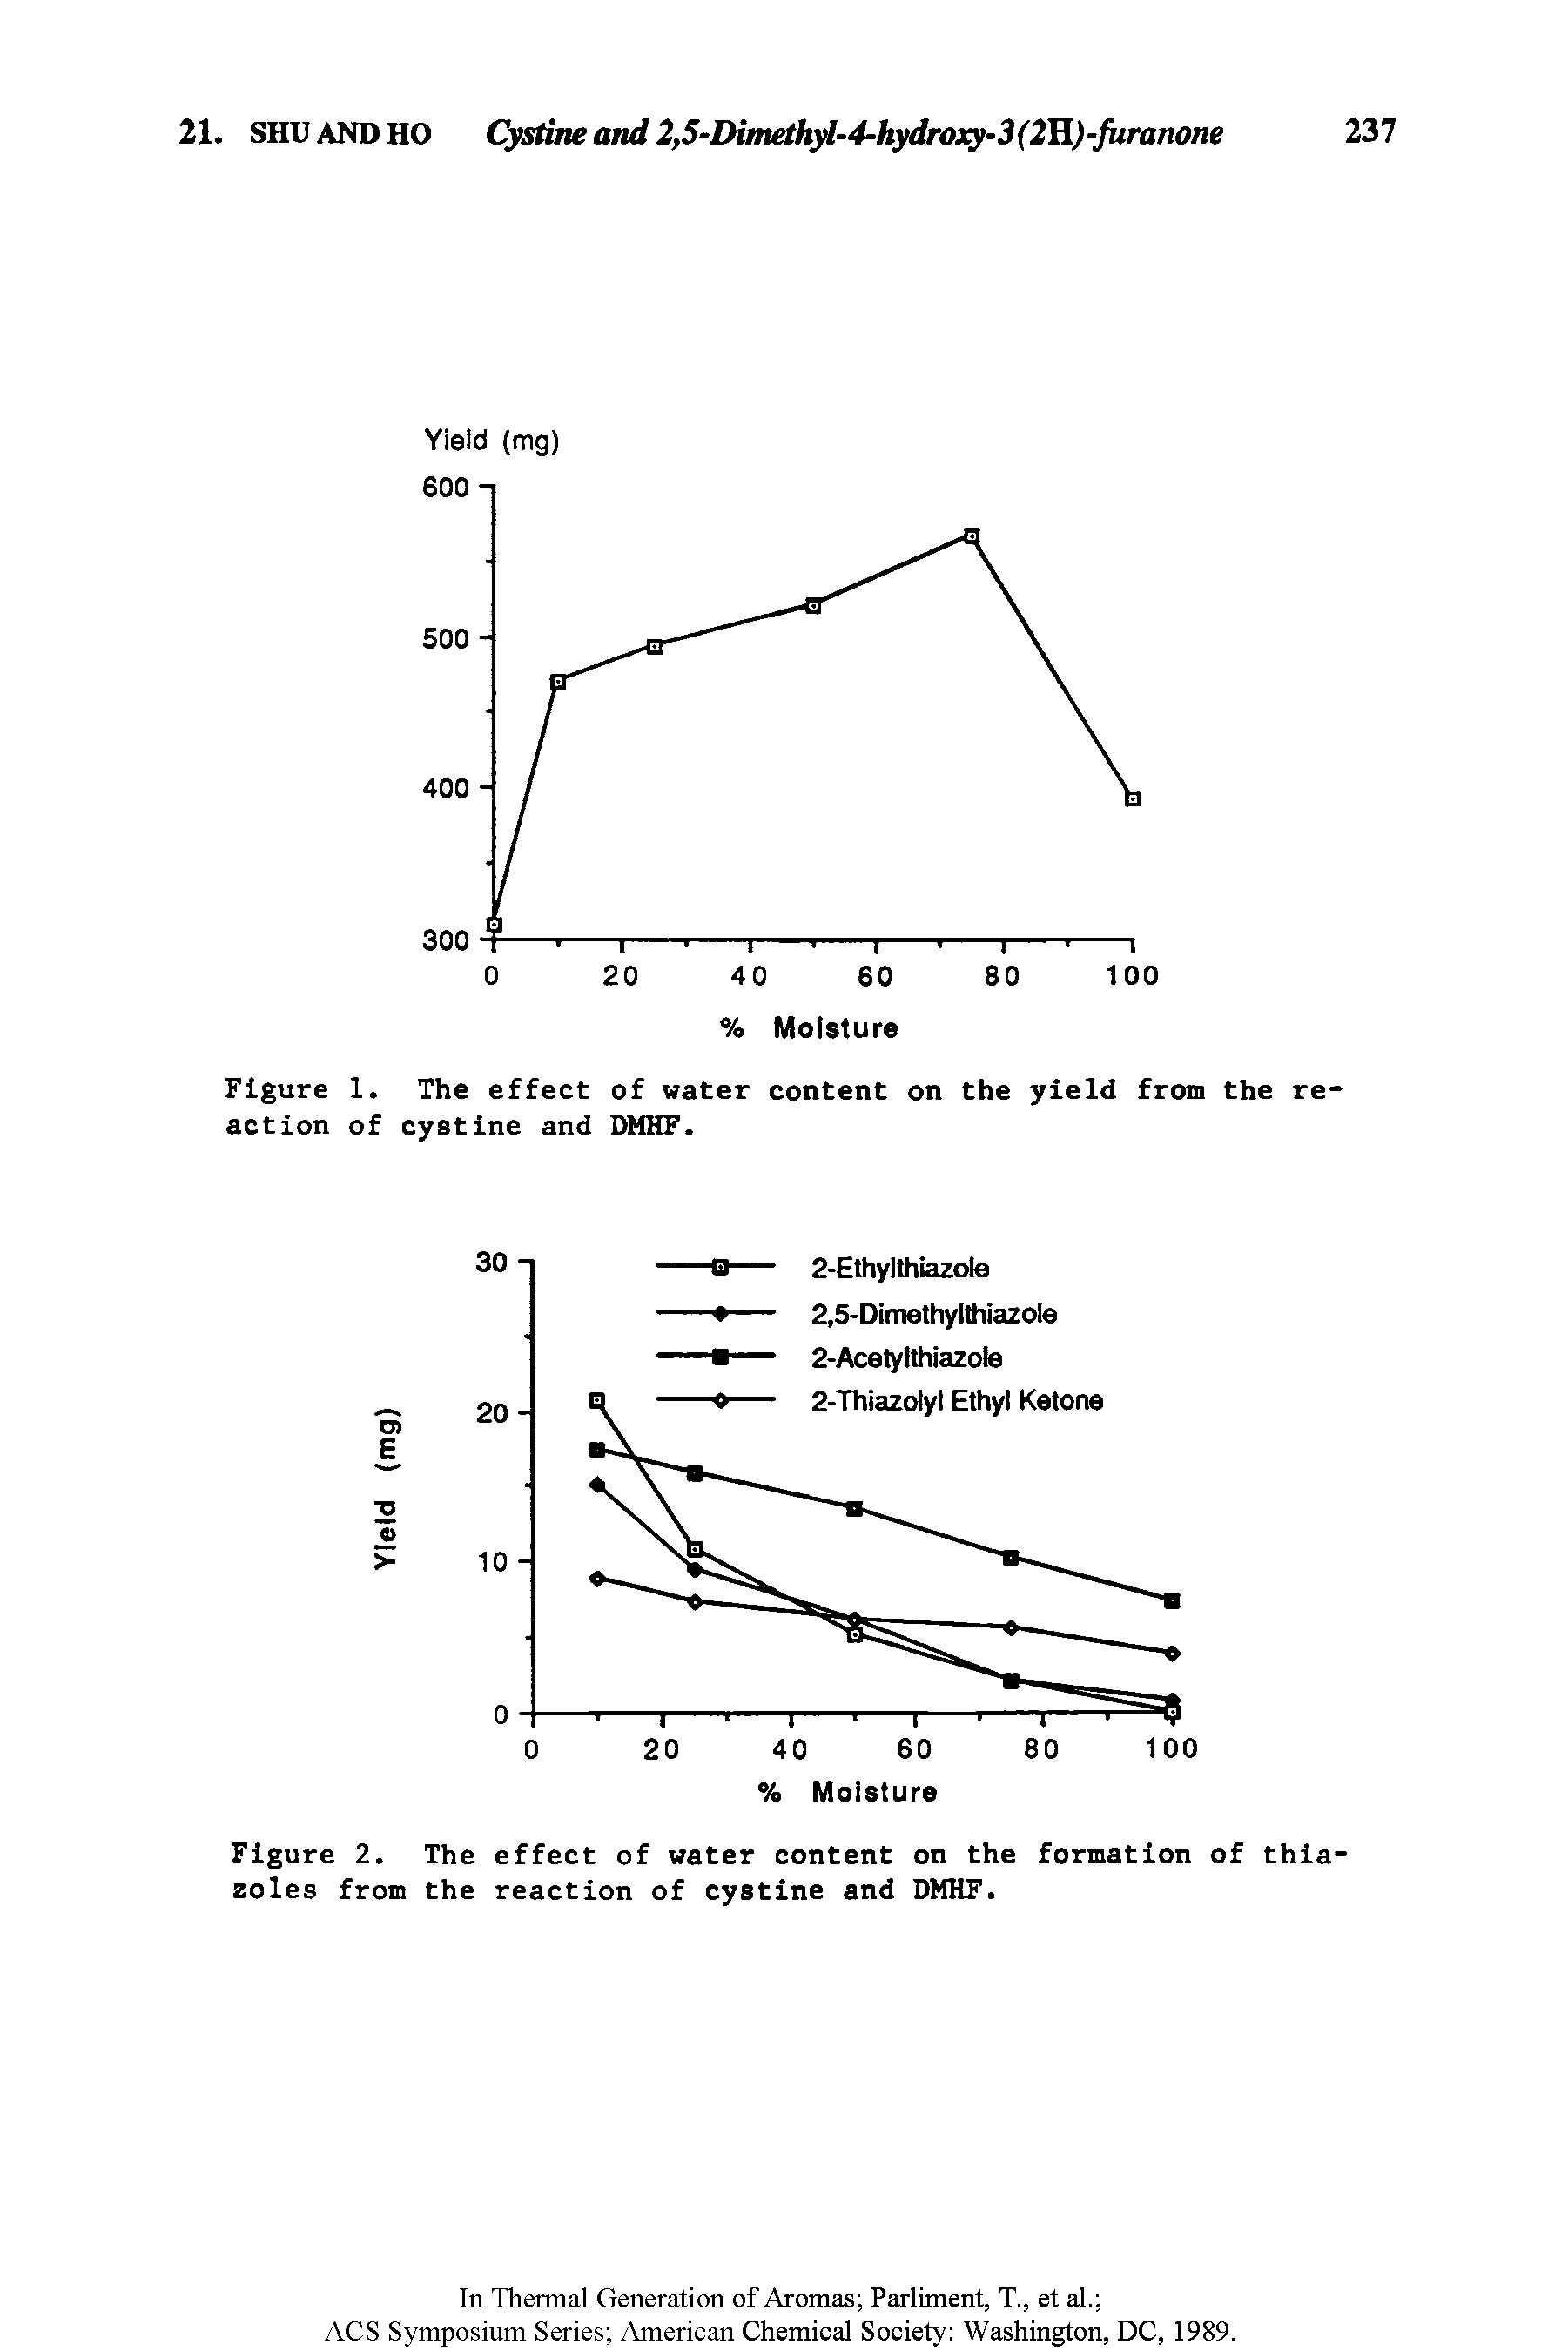 Figure 1. The effect of water content on the yield from the reaction of cystine and DMHF.